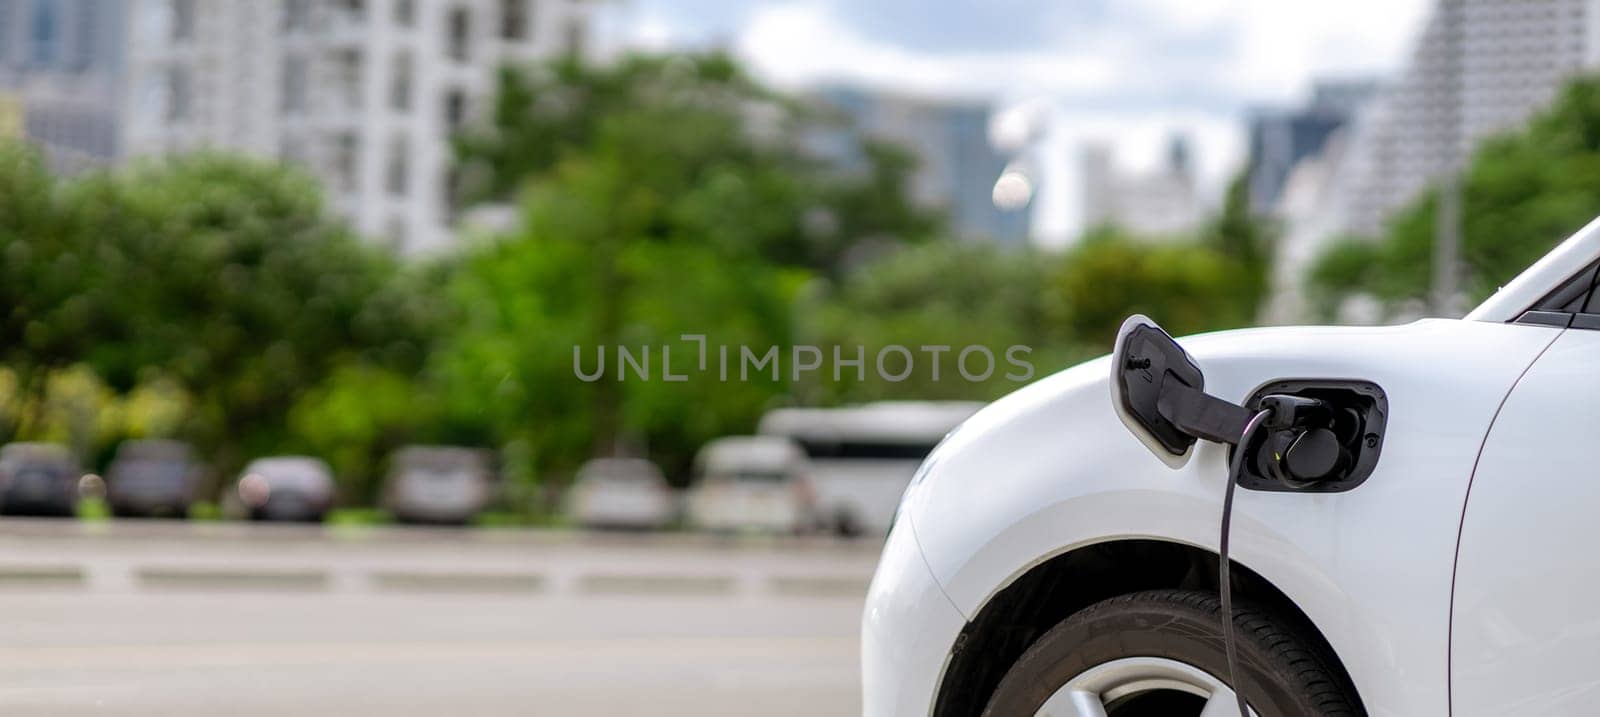 Focus closeup EV car and charger with blur background for progressive concept by biancoblue